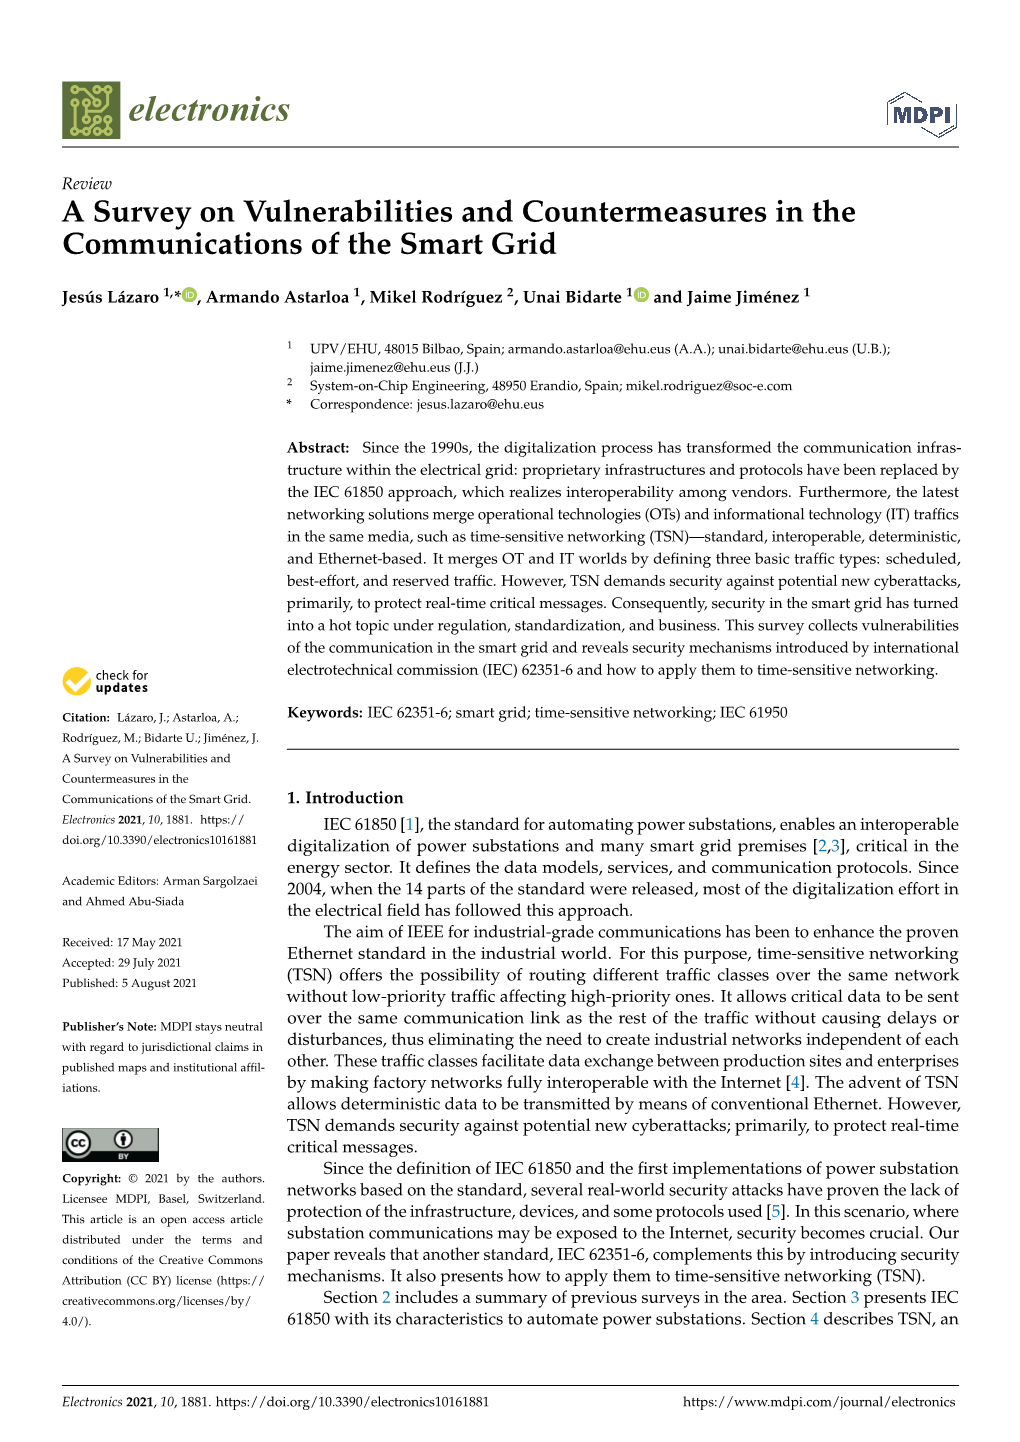 A Survey on Vulnerabilities and Countermeasures in the Communications of the Smart Grid